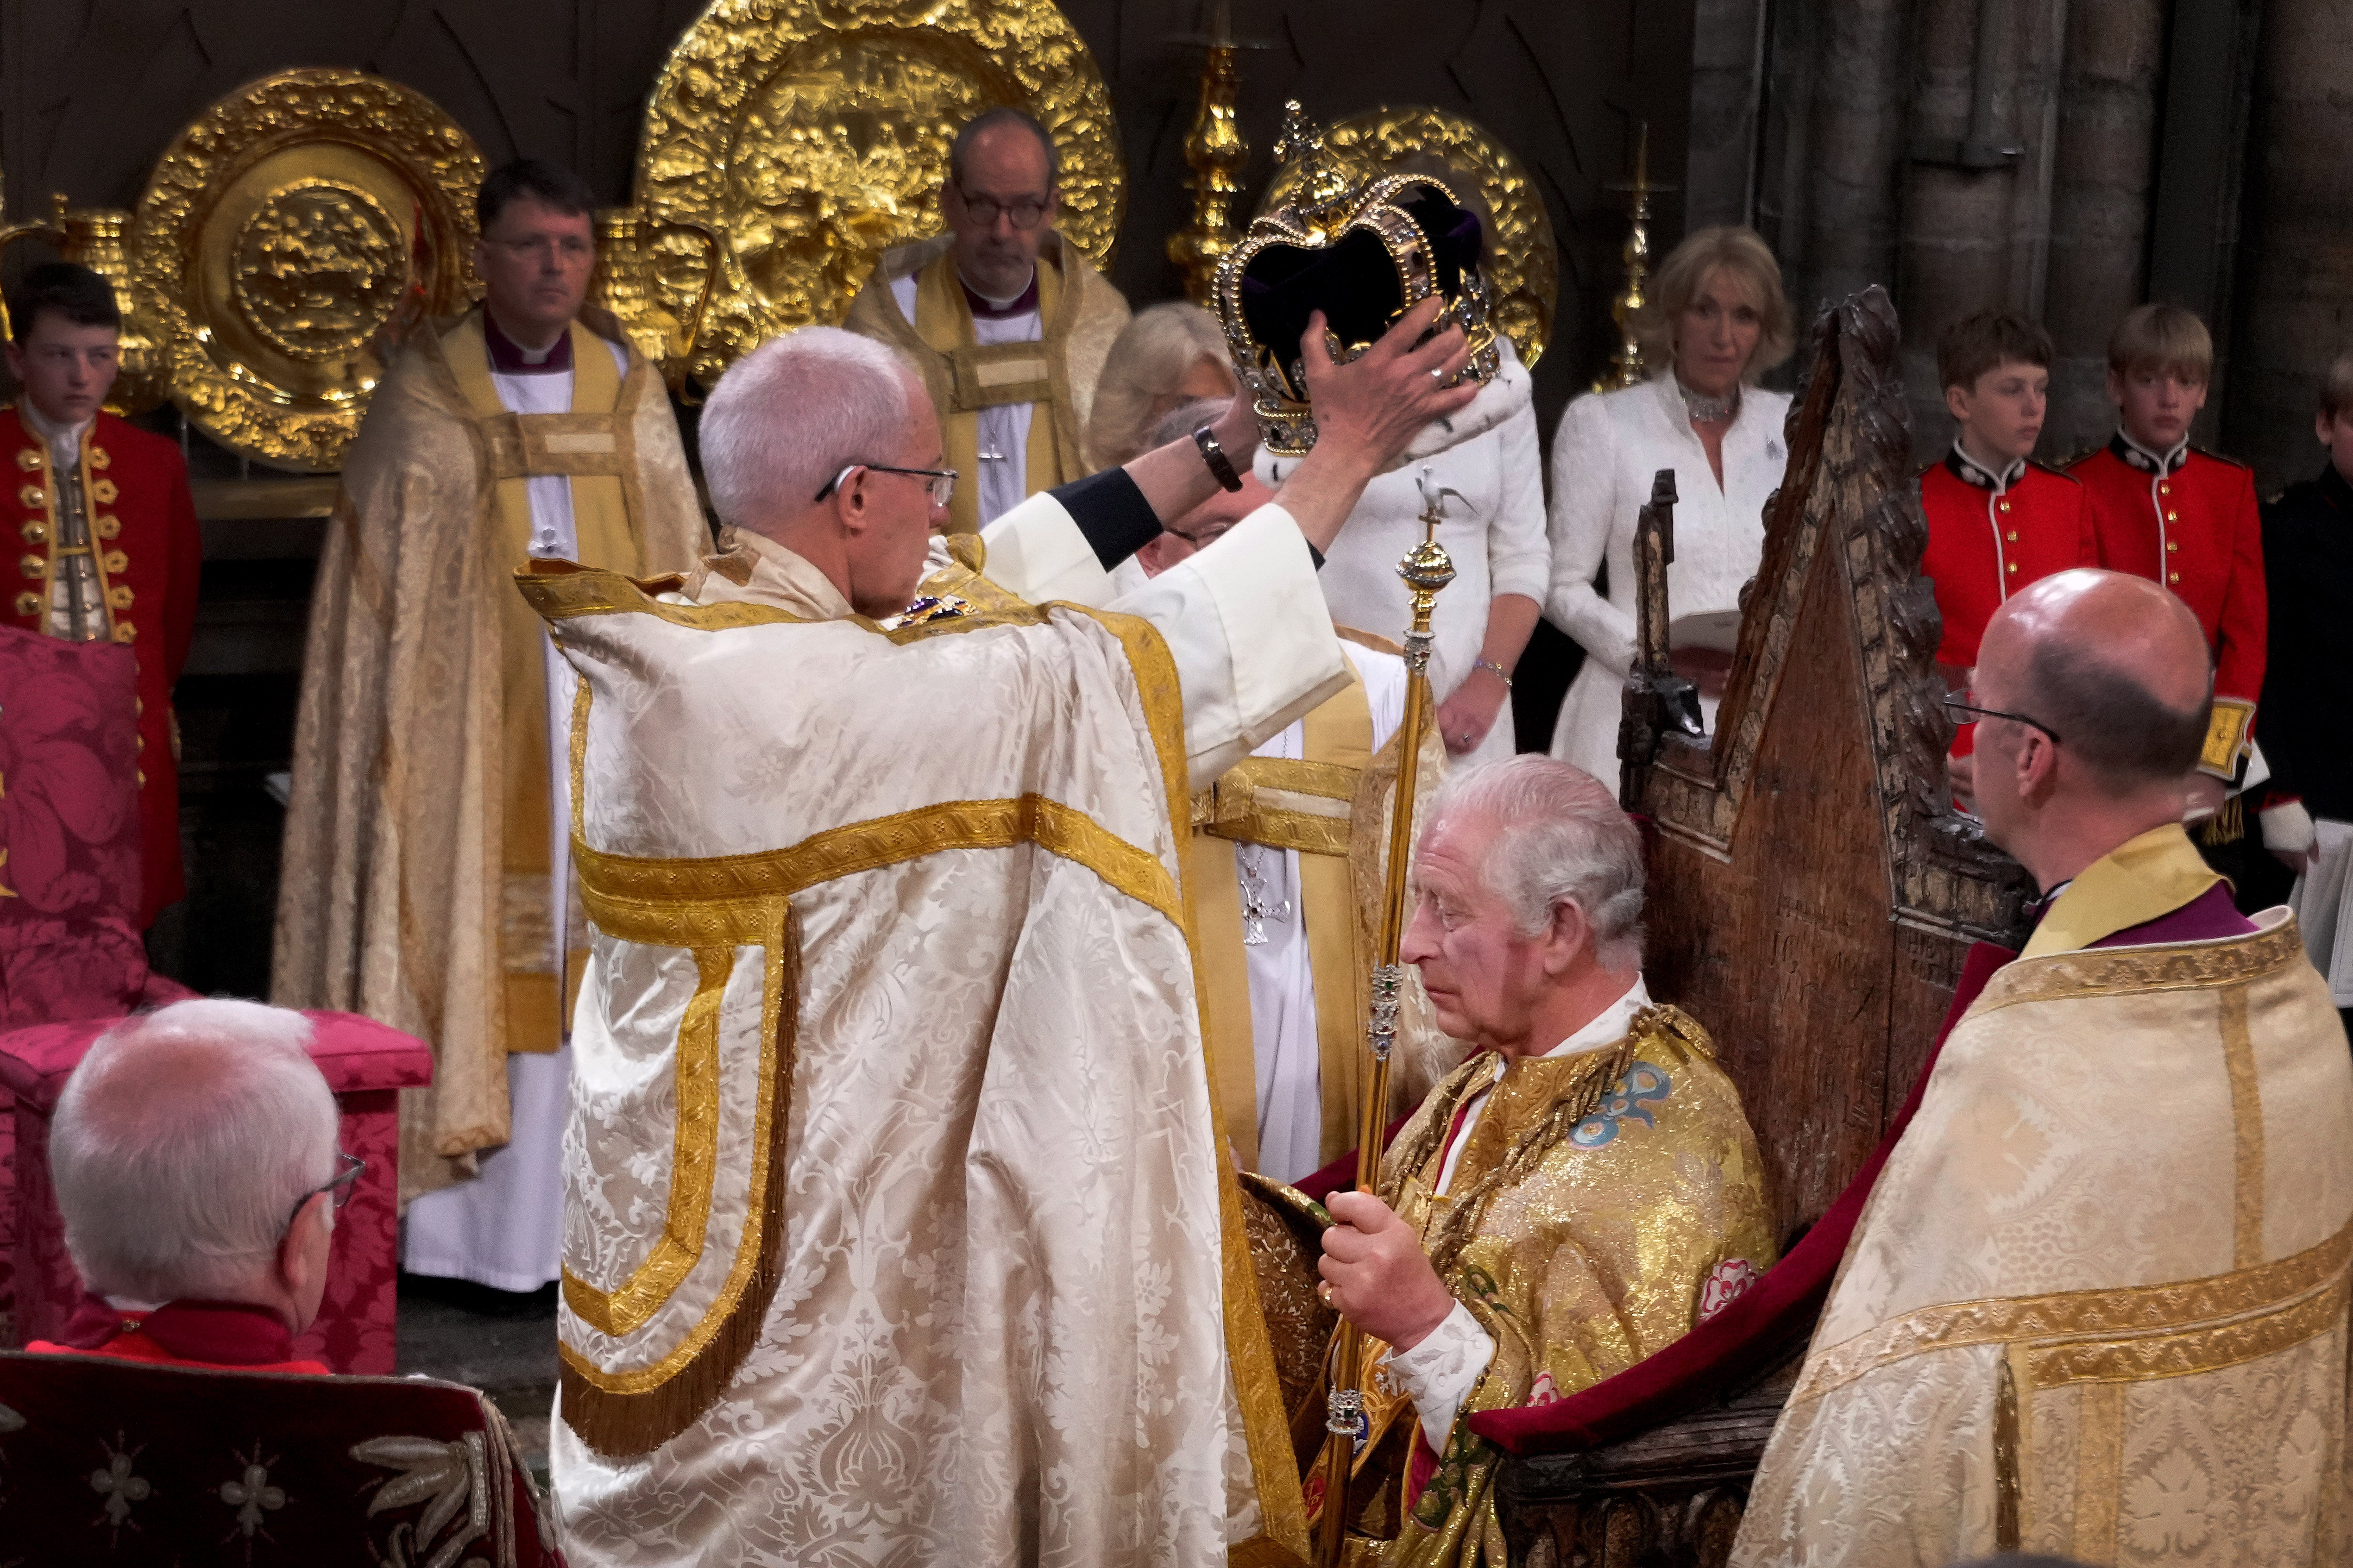 King Charles being crowned by the Archbishop of Canterbury, Justin Welby, during his coronation ceremony